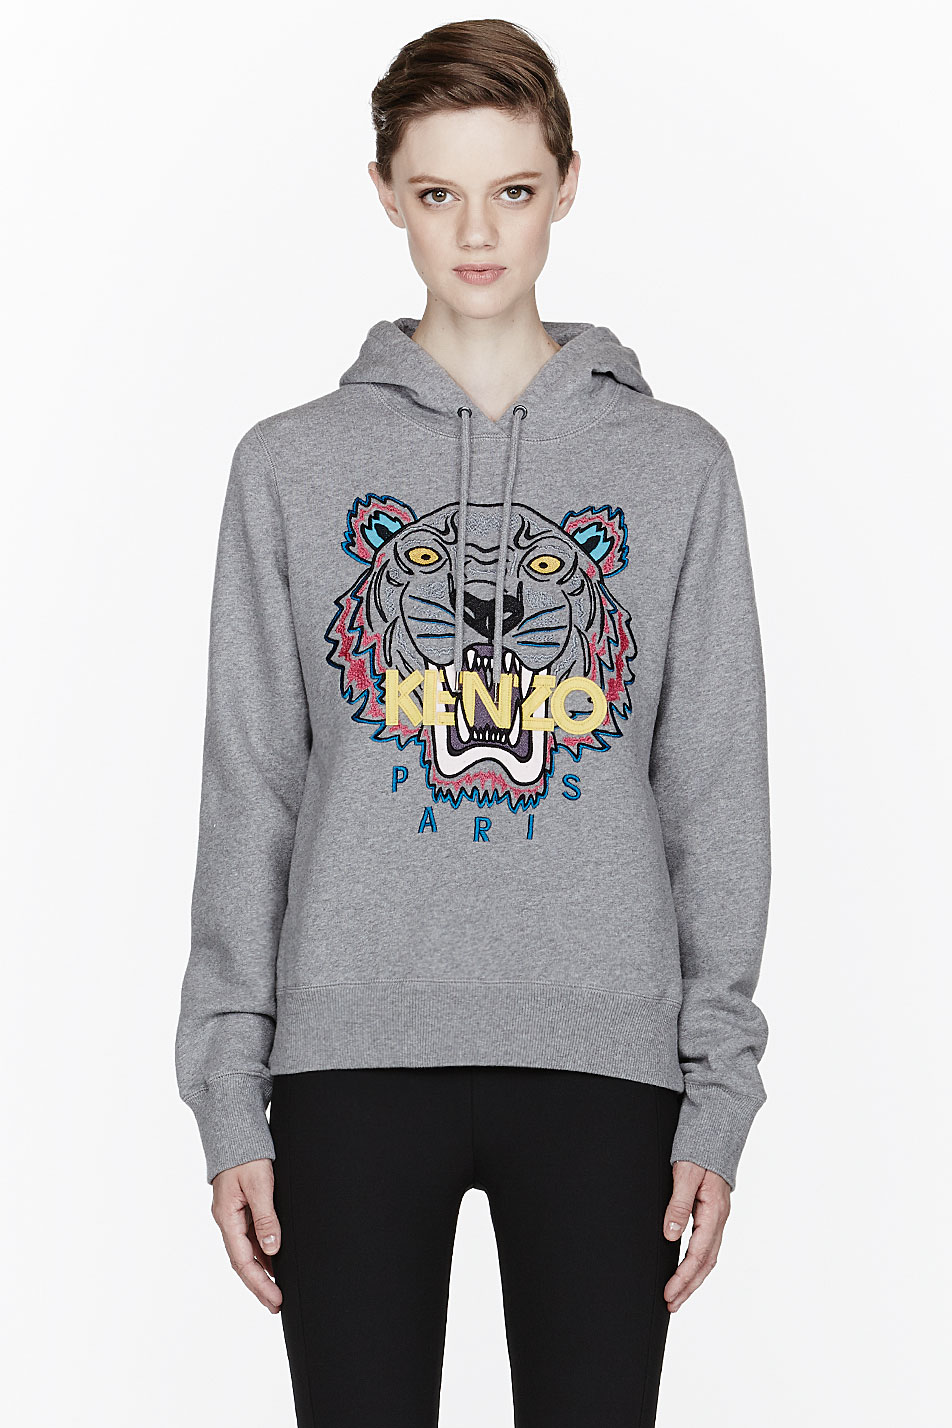 Lyst - Kenzo Grey Multicolor Embroidered Tiger Hoodie in Gray